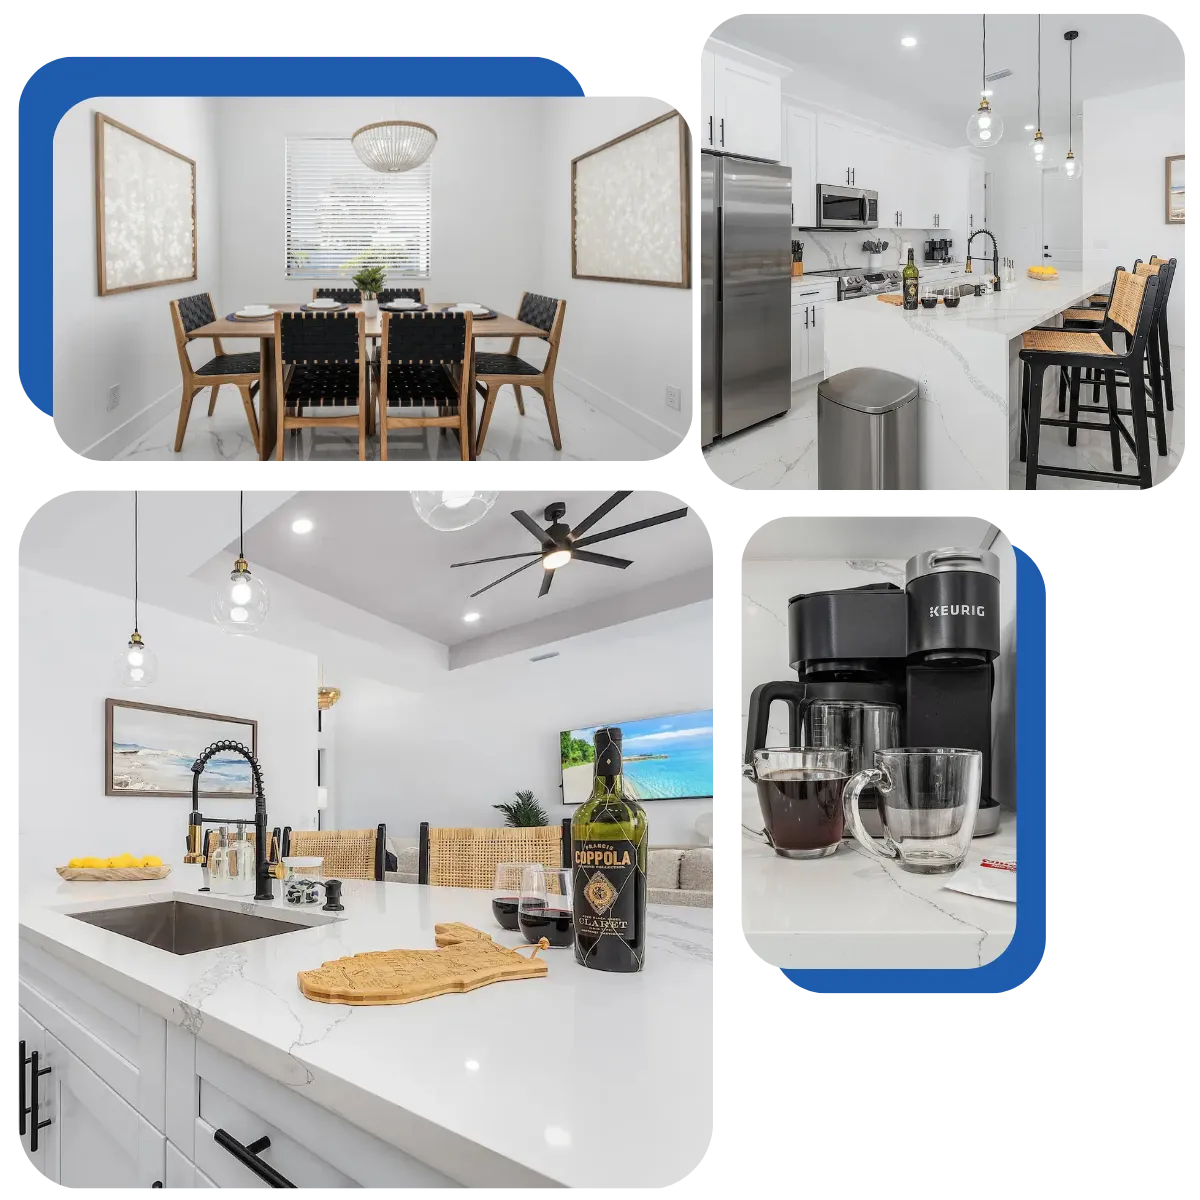 Palms Hideaway, a haven for food enthusiasts and casual cooks, showcases top-of-the-line appliances, expansive counter space, and a comprehensive selection of utensils for the ultimate culinary experience